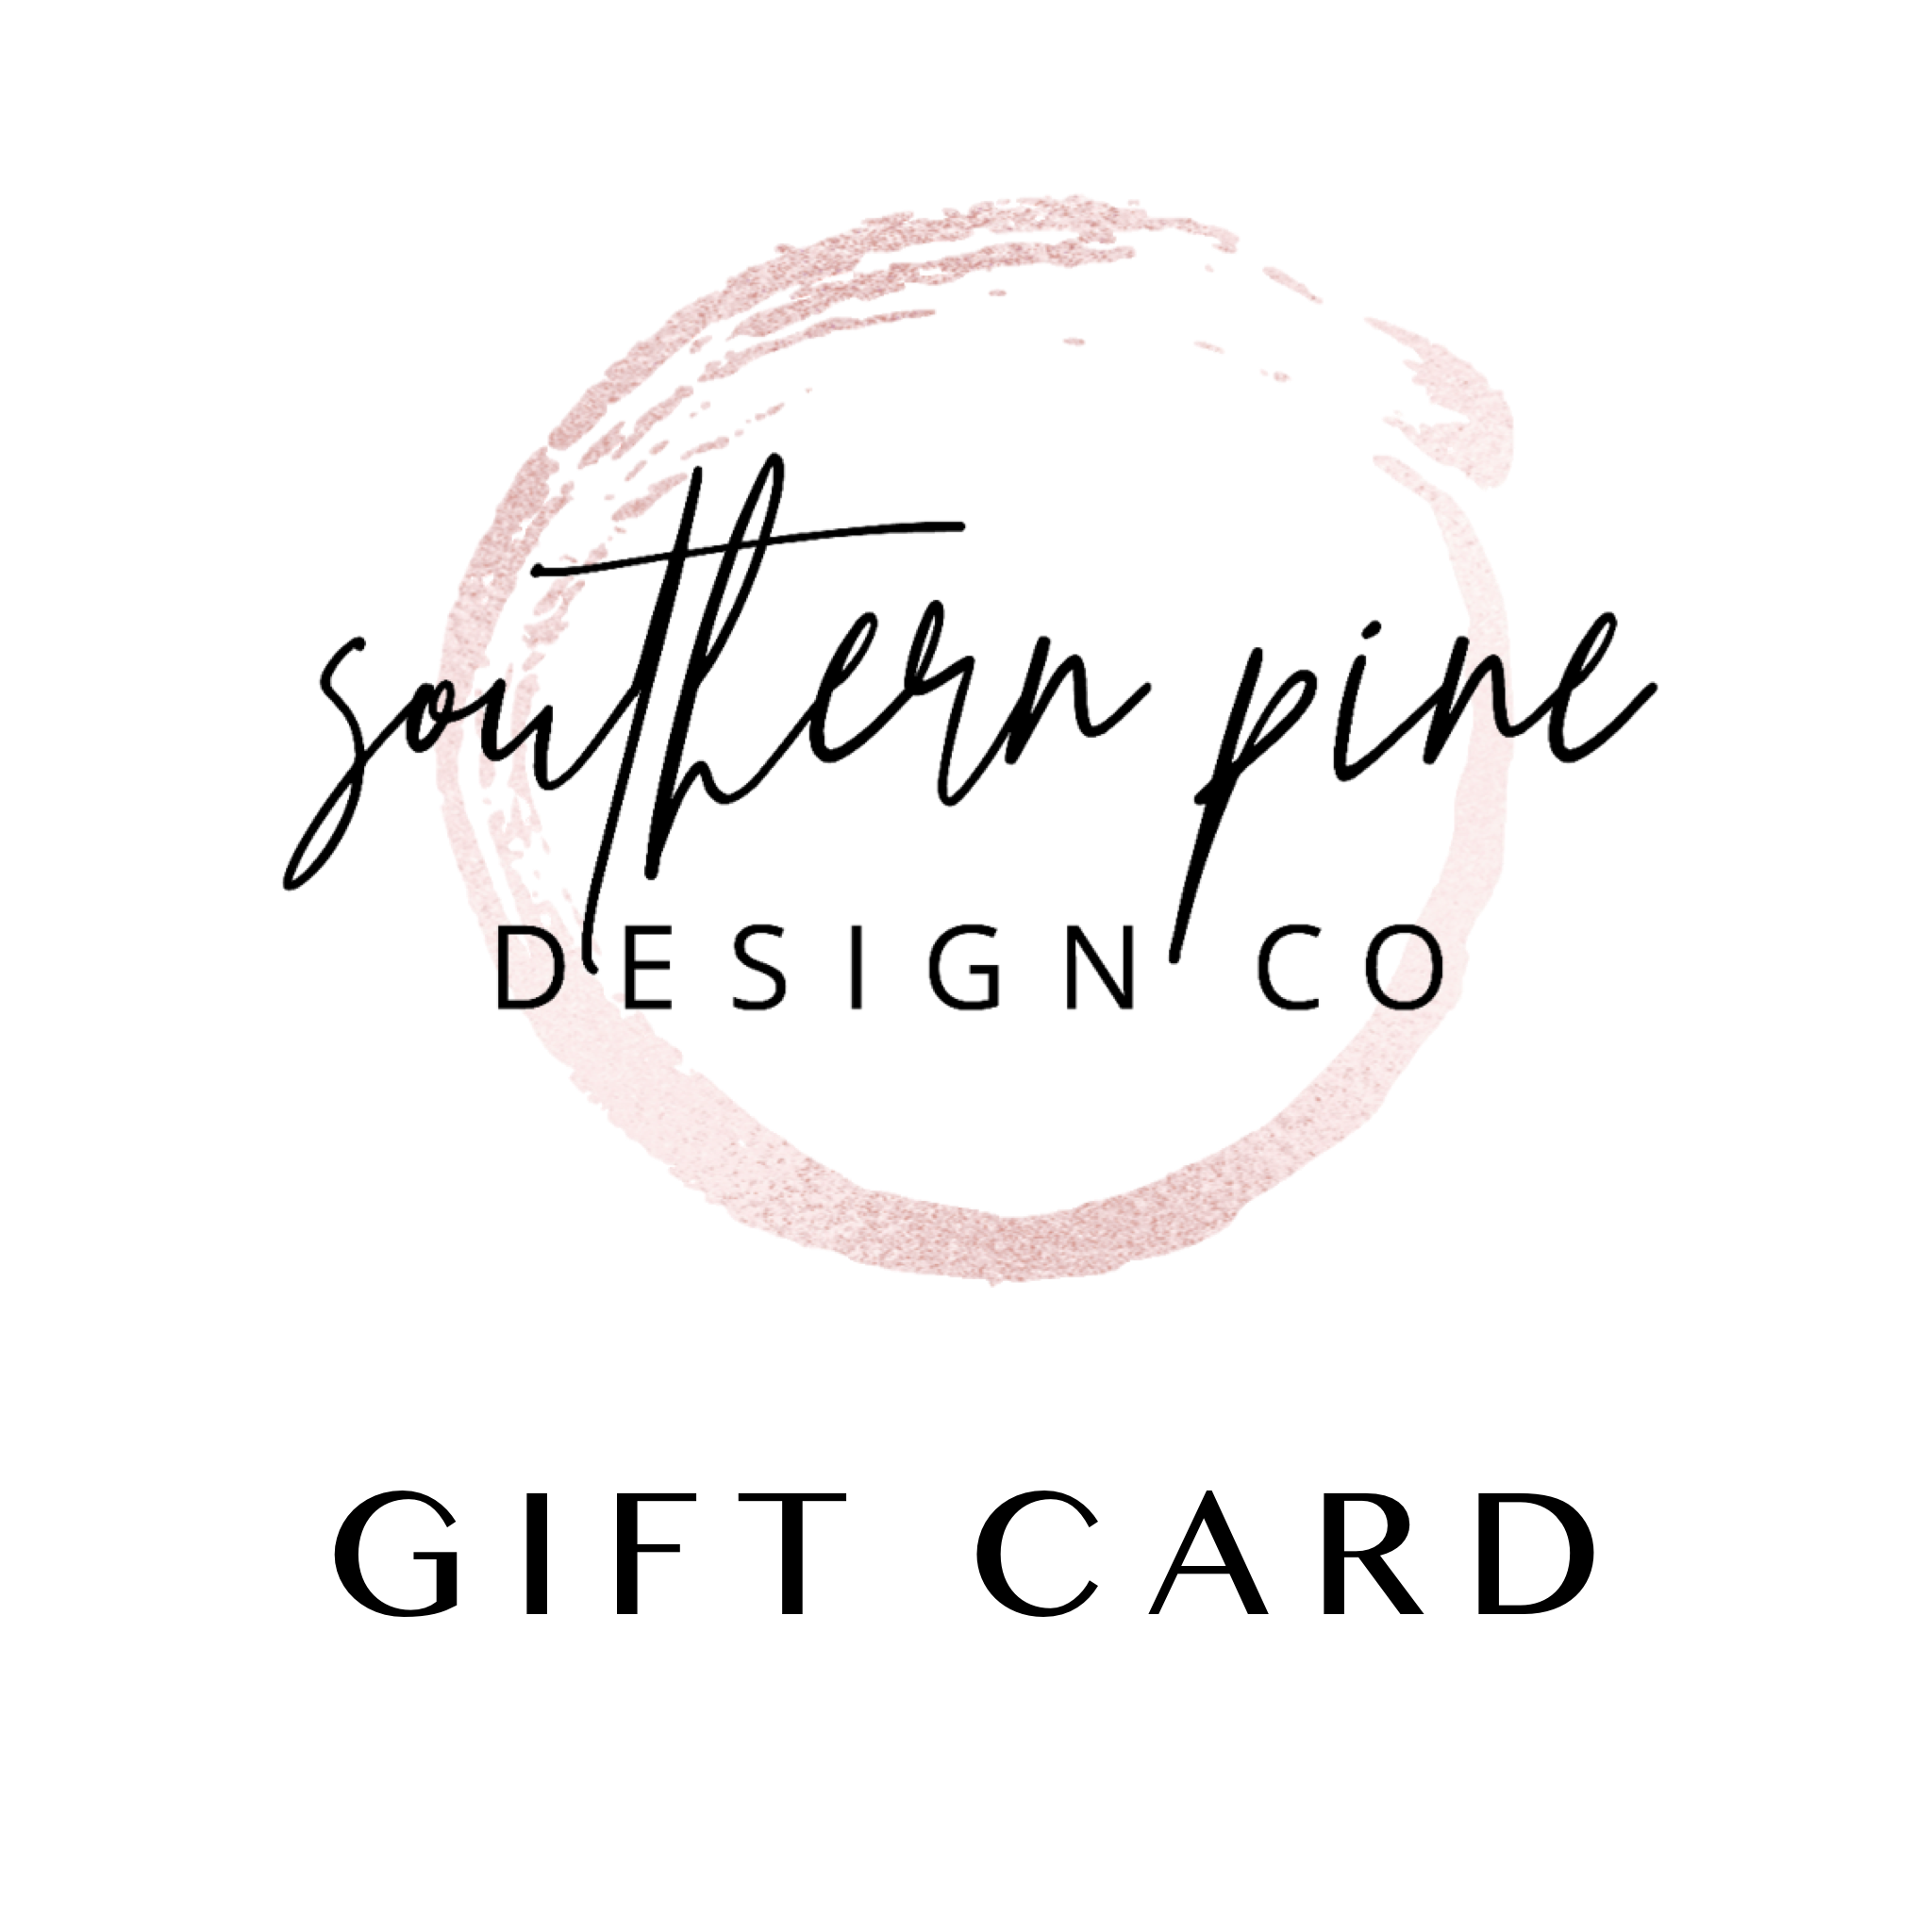 Southern Pine Design Co Gift Card